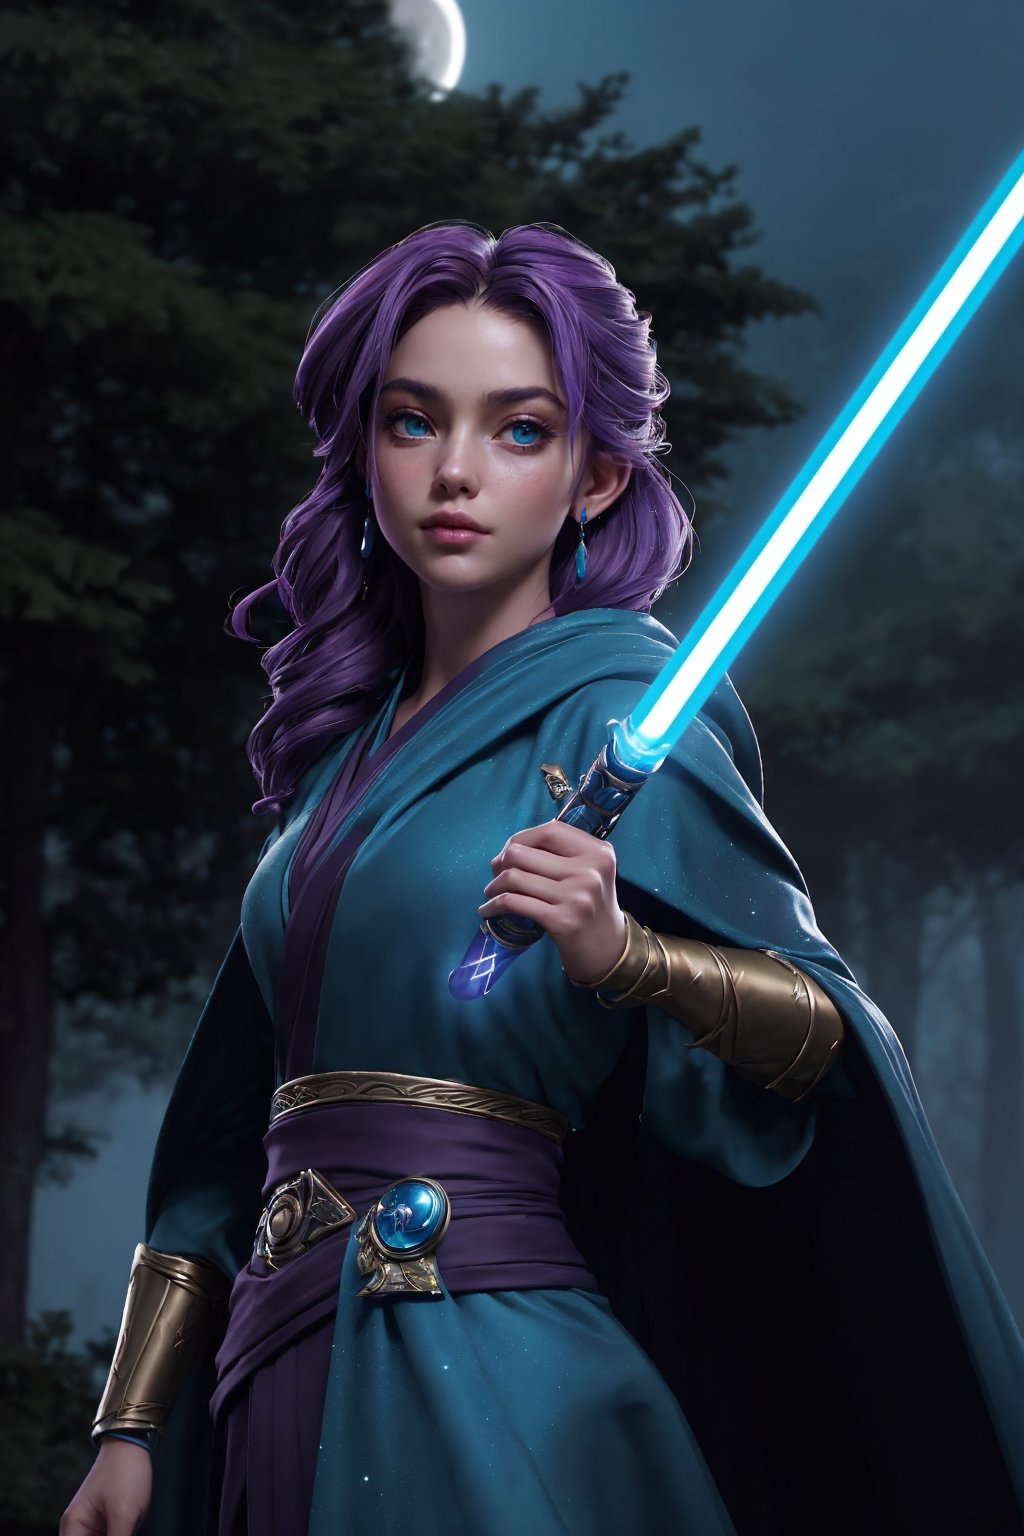 1girl, Highly detailed RAW color Photo, ((outdoor)), Full Body, ((Amidst the sprawling landscape of an ancient, mist-covered forest on a distant planet, a young and beautiful Jedi apprentice stands alone, bathed in the soft, ethereal glow of a crescent moon. The mist gently swirls around her, adding an air of mystique and enchantment to the scene.

Her attire, adorned with the traditional Jedi robes, is complemented by a sash of deep azure, indicating her growing prowess in the Force. Her lightsaber, a brilliant cerulean hue, is held firmly in her hand, its blade casting a shimmering reflection on her serene face.

As she stands in a graceful and poised manner, her eyes, sparkling like distant stars, reflect both determination and a deep sense of purpose. The shadows dance playfully around her, mirroring her extraordinary connection to the Force. The calmness of her demeanor contrasts sharply with the untamed beauty of the wilderness that surrounds her.

The camera pans slowly, capturing the awe-inspiring cinematic shot of the young Jedi apprentice, making it evident that she is destined for greatness. The hauntingly enchanting soundtrack heightens the emotions of the scene, further emphasizing the significance of her journey as she embarks on the path of a true Jedi.

The radiant light from the crescent moon embraces her, amplifying her presence as a symbol of hope in a galaxy plagued by darkness. In this fleeting moment, it becomes evident that she possesses the power to inspire and change the course of events in the ongoing battle between good and evil.

This cinematic shot encapsulates the essence of a young and beautiful Jedi, an embodiment of courage, wisdom, and determination, ready to face the challenges that lie ahead. The misty forest and the celestial illumination paint a picture of both the mystery and promise of her destiny. The viewer is left captivated, longing to witness the unfolding of her heroic journey as she seeks to bring balance and justice to the galaxy.)) age 18, short_curly_hair, dark_hair, green-eyes, ((sexy_lips)), intricate_detail, realistic, dark_tone, cinematic_still, color_graded, on an aliean_planets, far_away_mountains, spaceship, cinematic lighting, shallow depth of field, photographed on a Sony a9 II, ((35mm f1.8_wide angle lens)), sharp focus, cinematic film still, particle effects, raytracing, detailed_skin, sharp_eyes, beautifull, looking_at_camera, lensflare, anamorphic_lens, glare, glow, ((wide_shot))